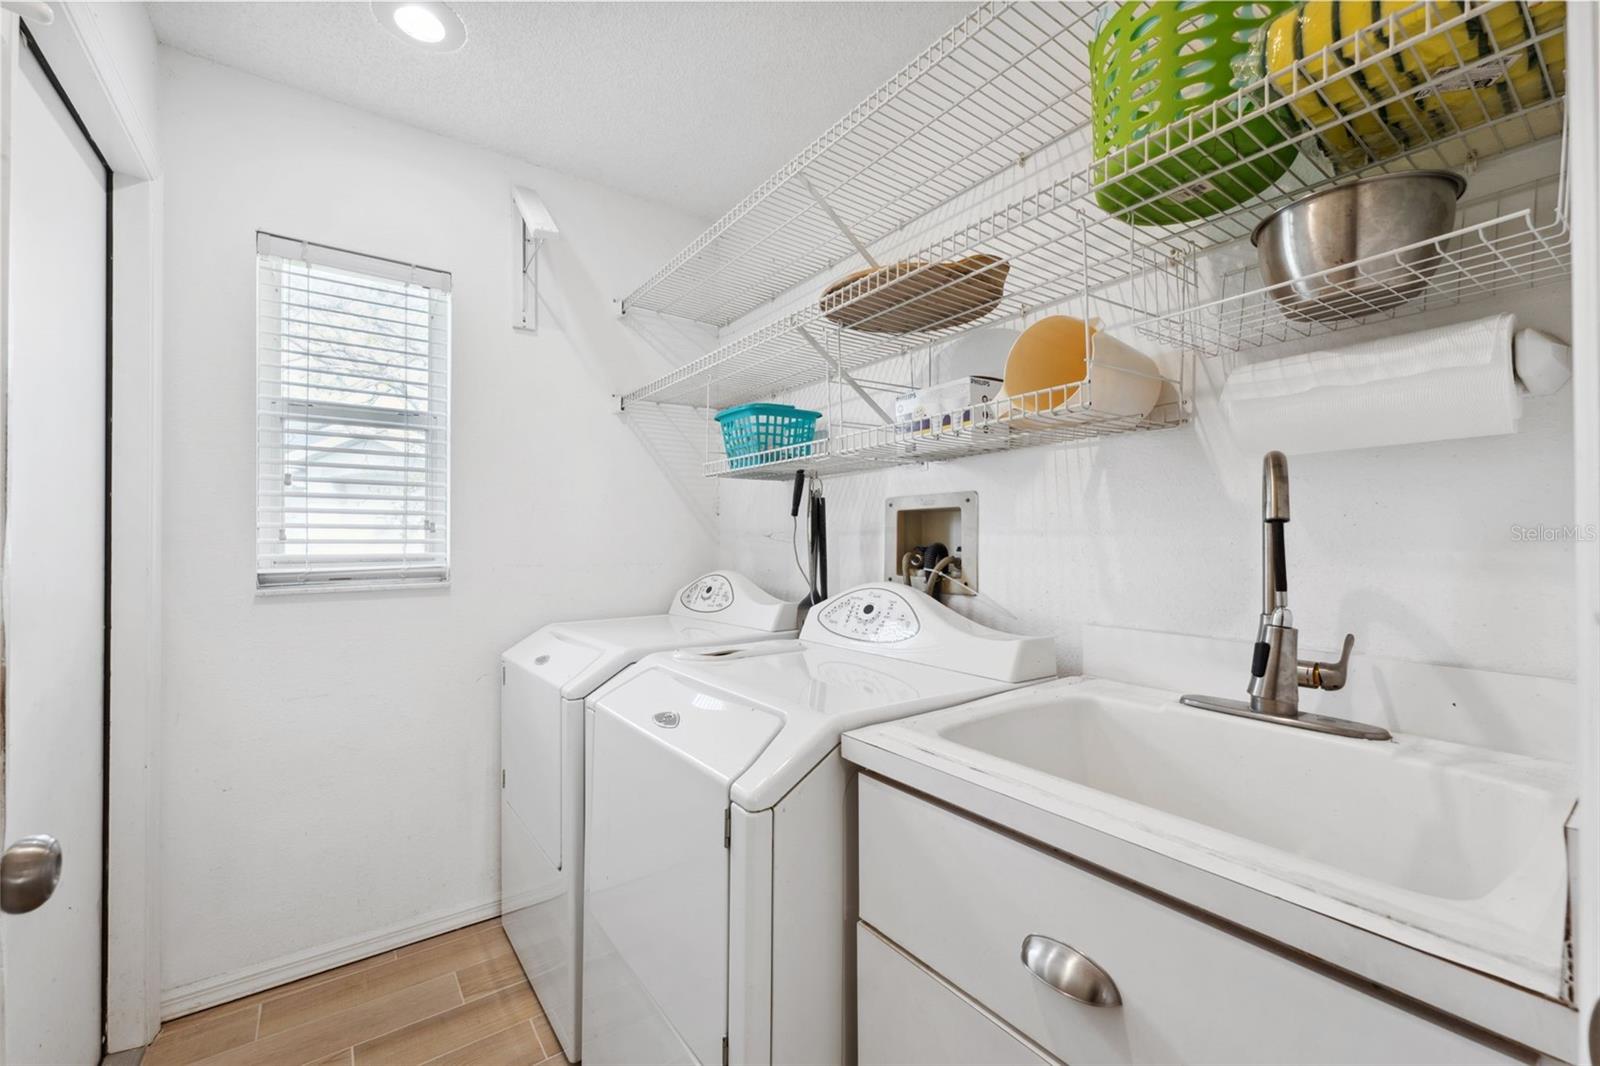 Laundry Room With Sink